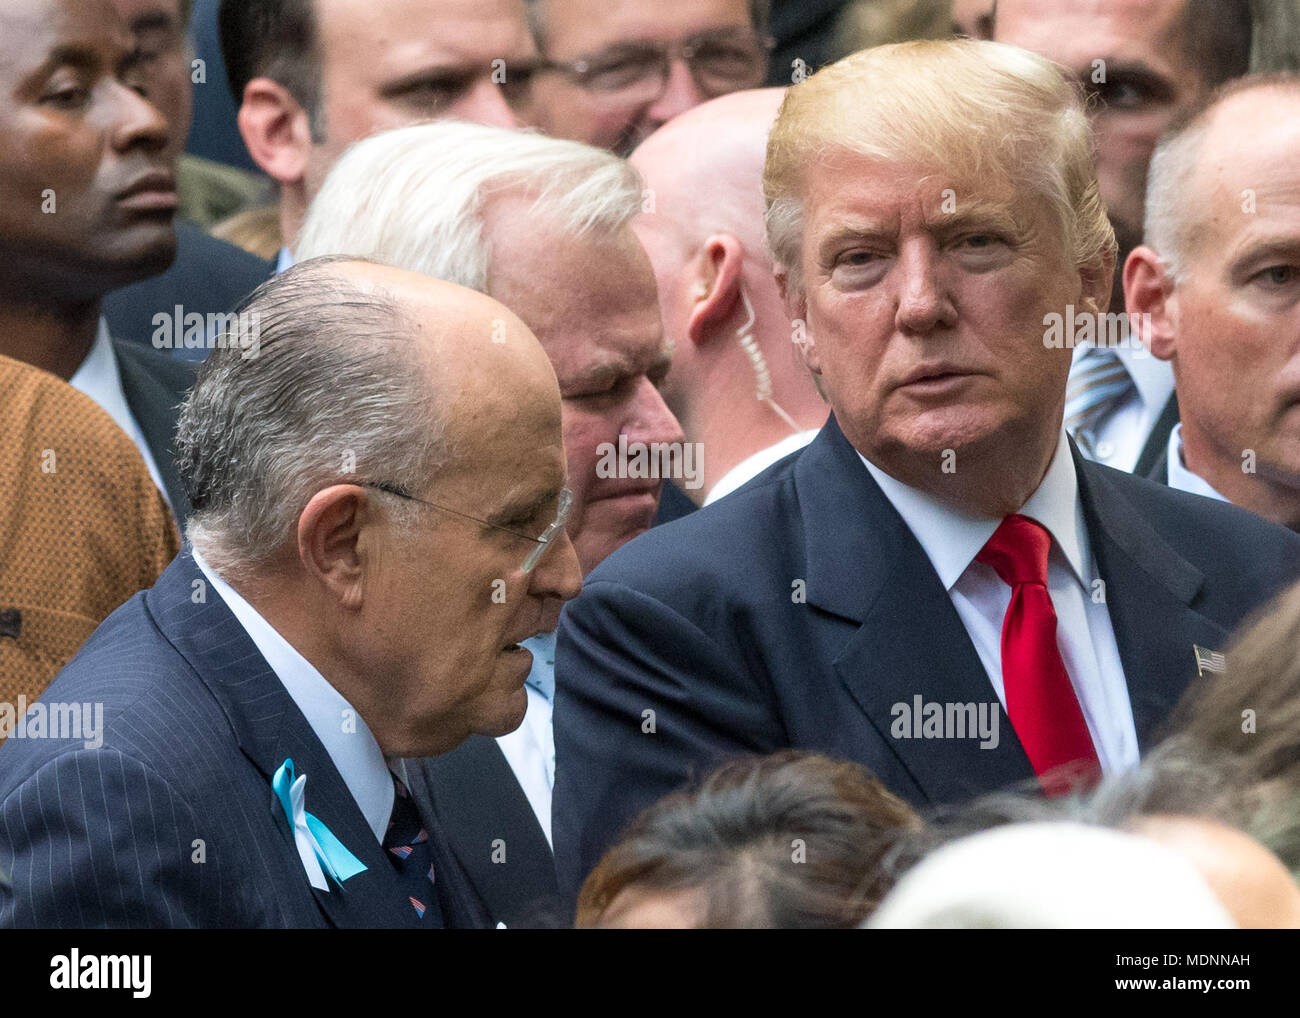 New York, USA, 11 September 2016.  US President Donald Trump talks to former New York Mayor Rudolph Giuliani in this file photo from 9/11/2016 at the September 11 Memorial in New York City.  Giuliani will join Trump's legal team in an effort to resolve the special counsel’s Russia inquiry, it was announced on April 19, 2018. Photo by Enrique Shore​ / Alamy Stock Photo Stock Photo